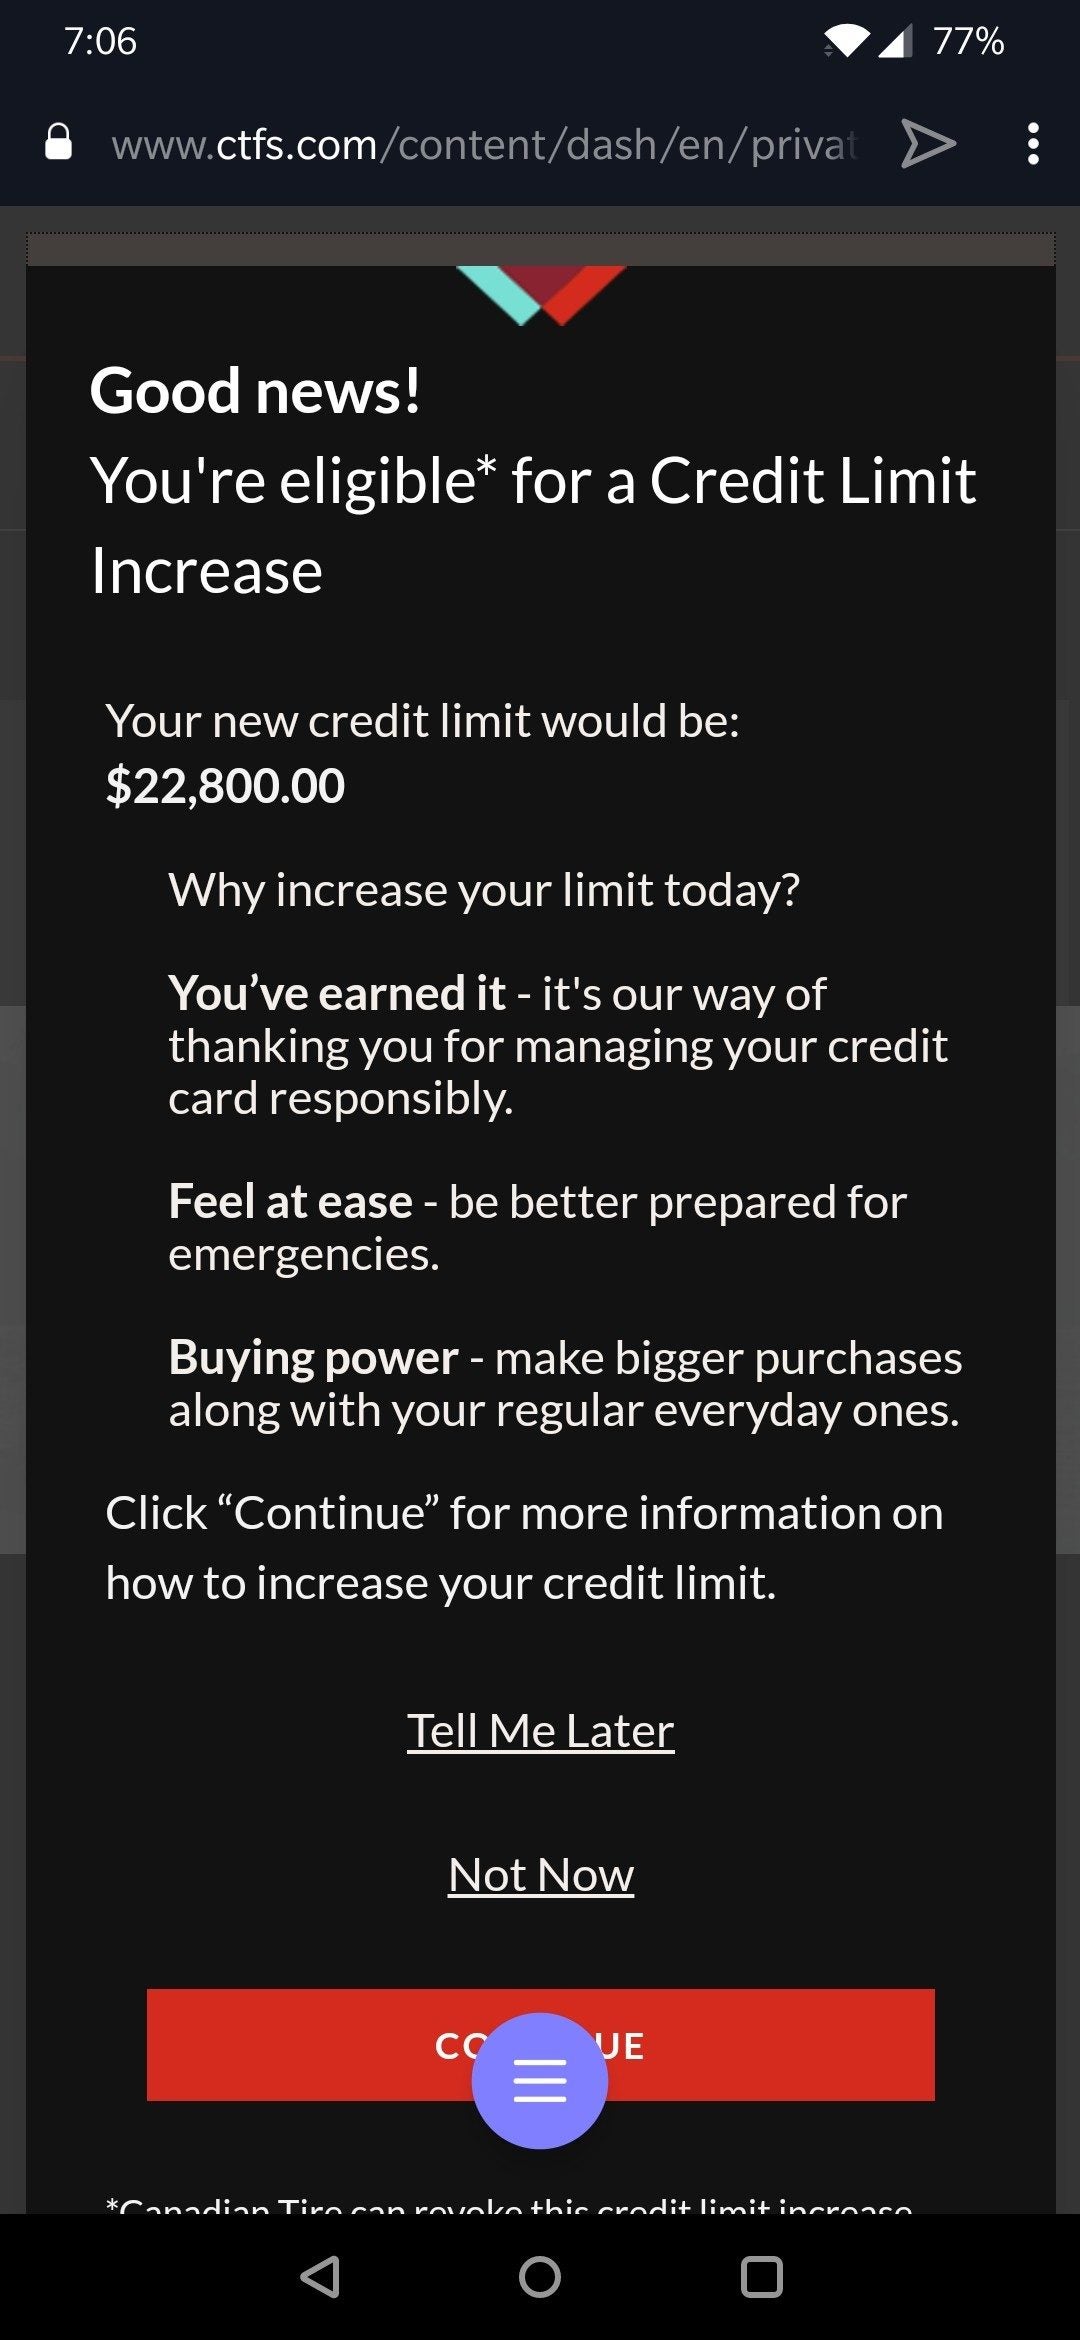 Canadian Tire credit limit increase frequency - Page 14 - RedFlagDeals.com Forums